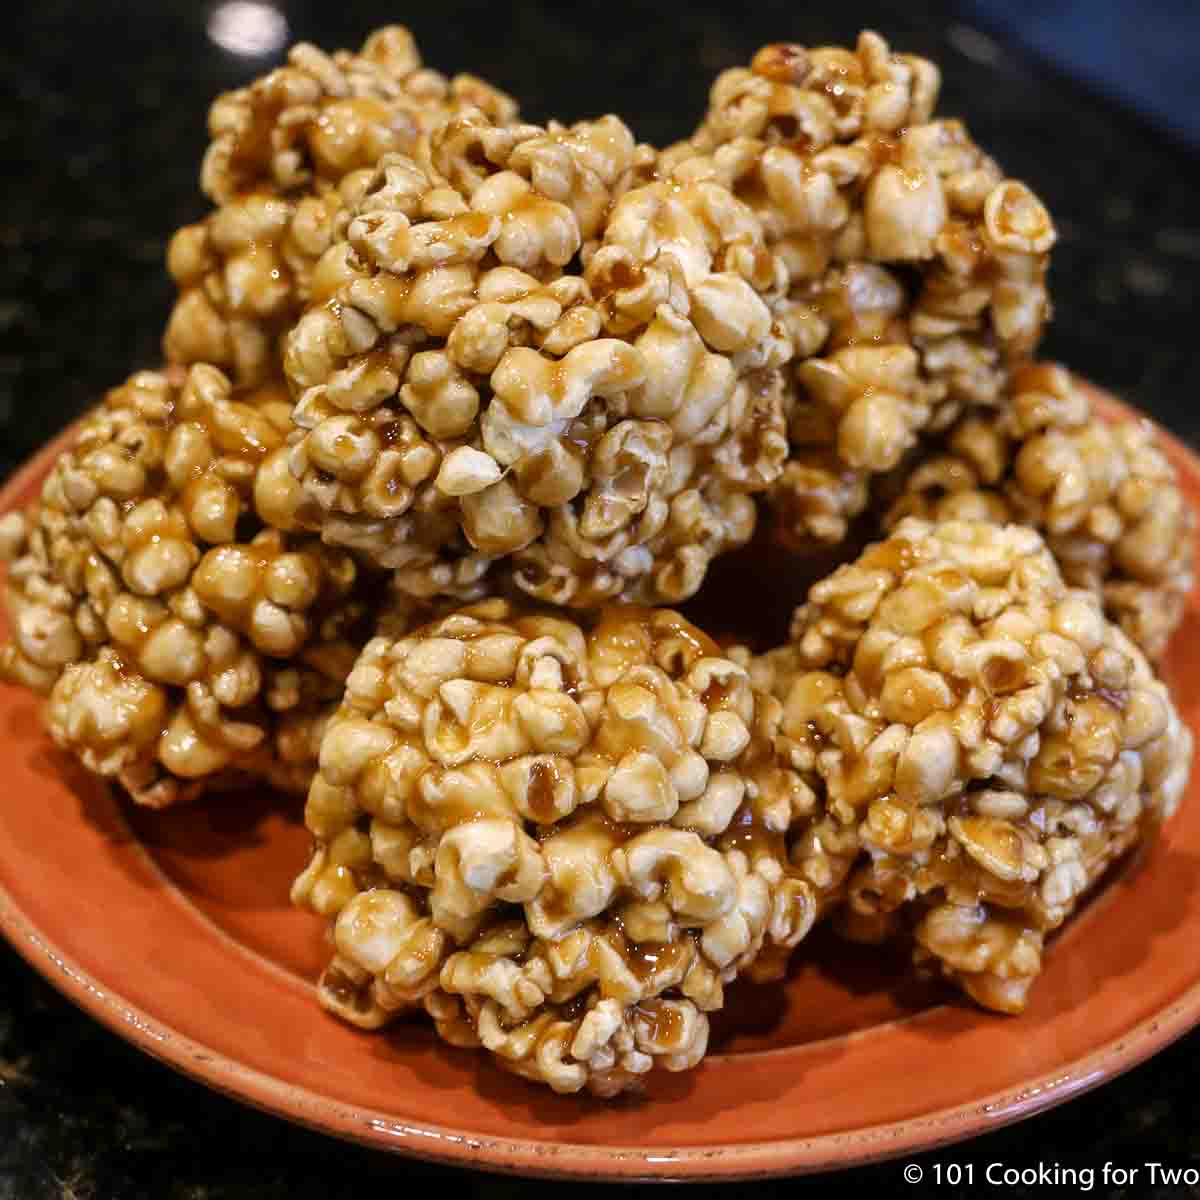 A pile of Popcorn Balls on an orange plate.